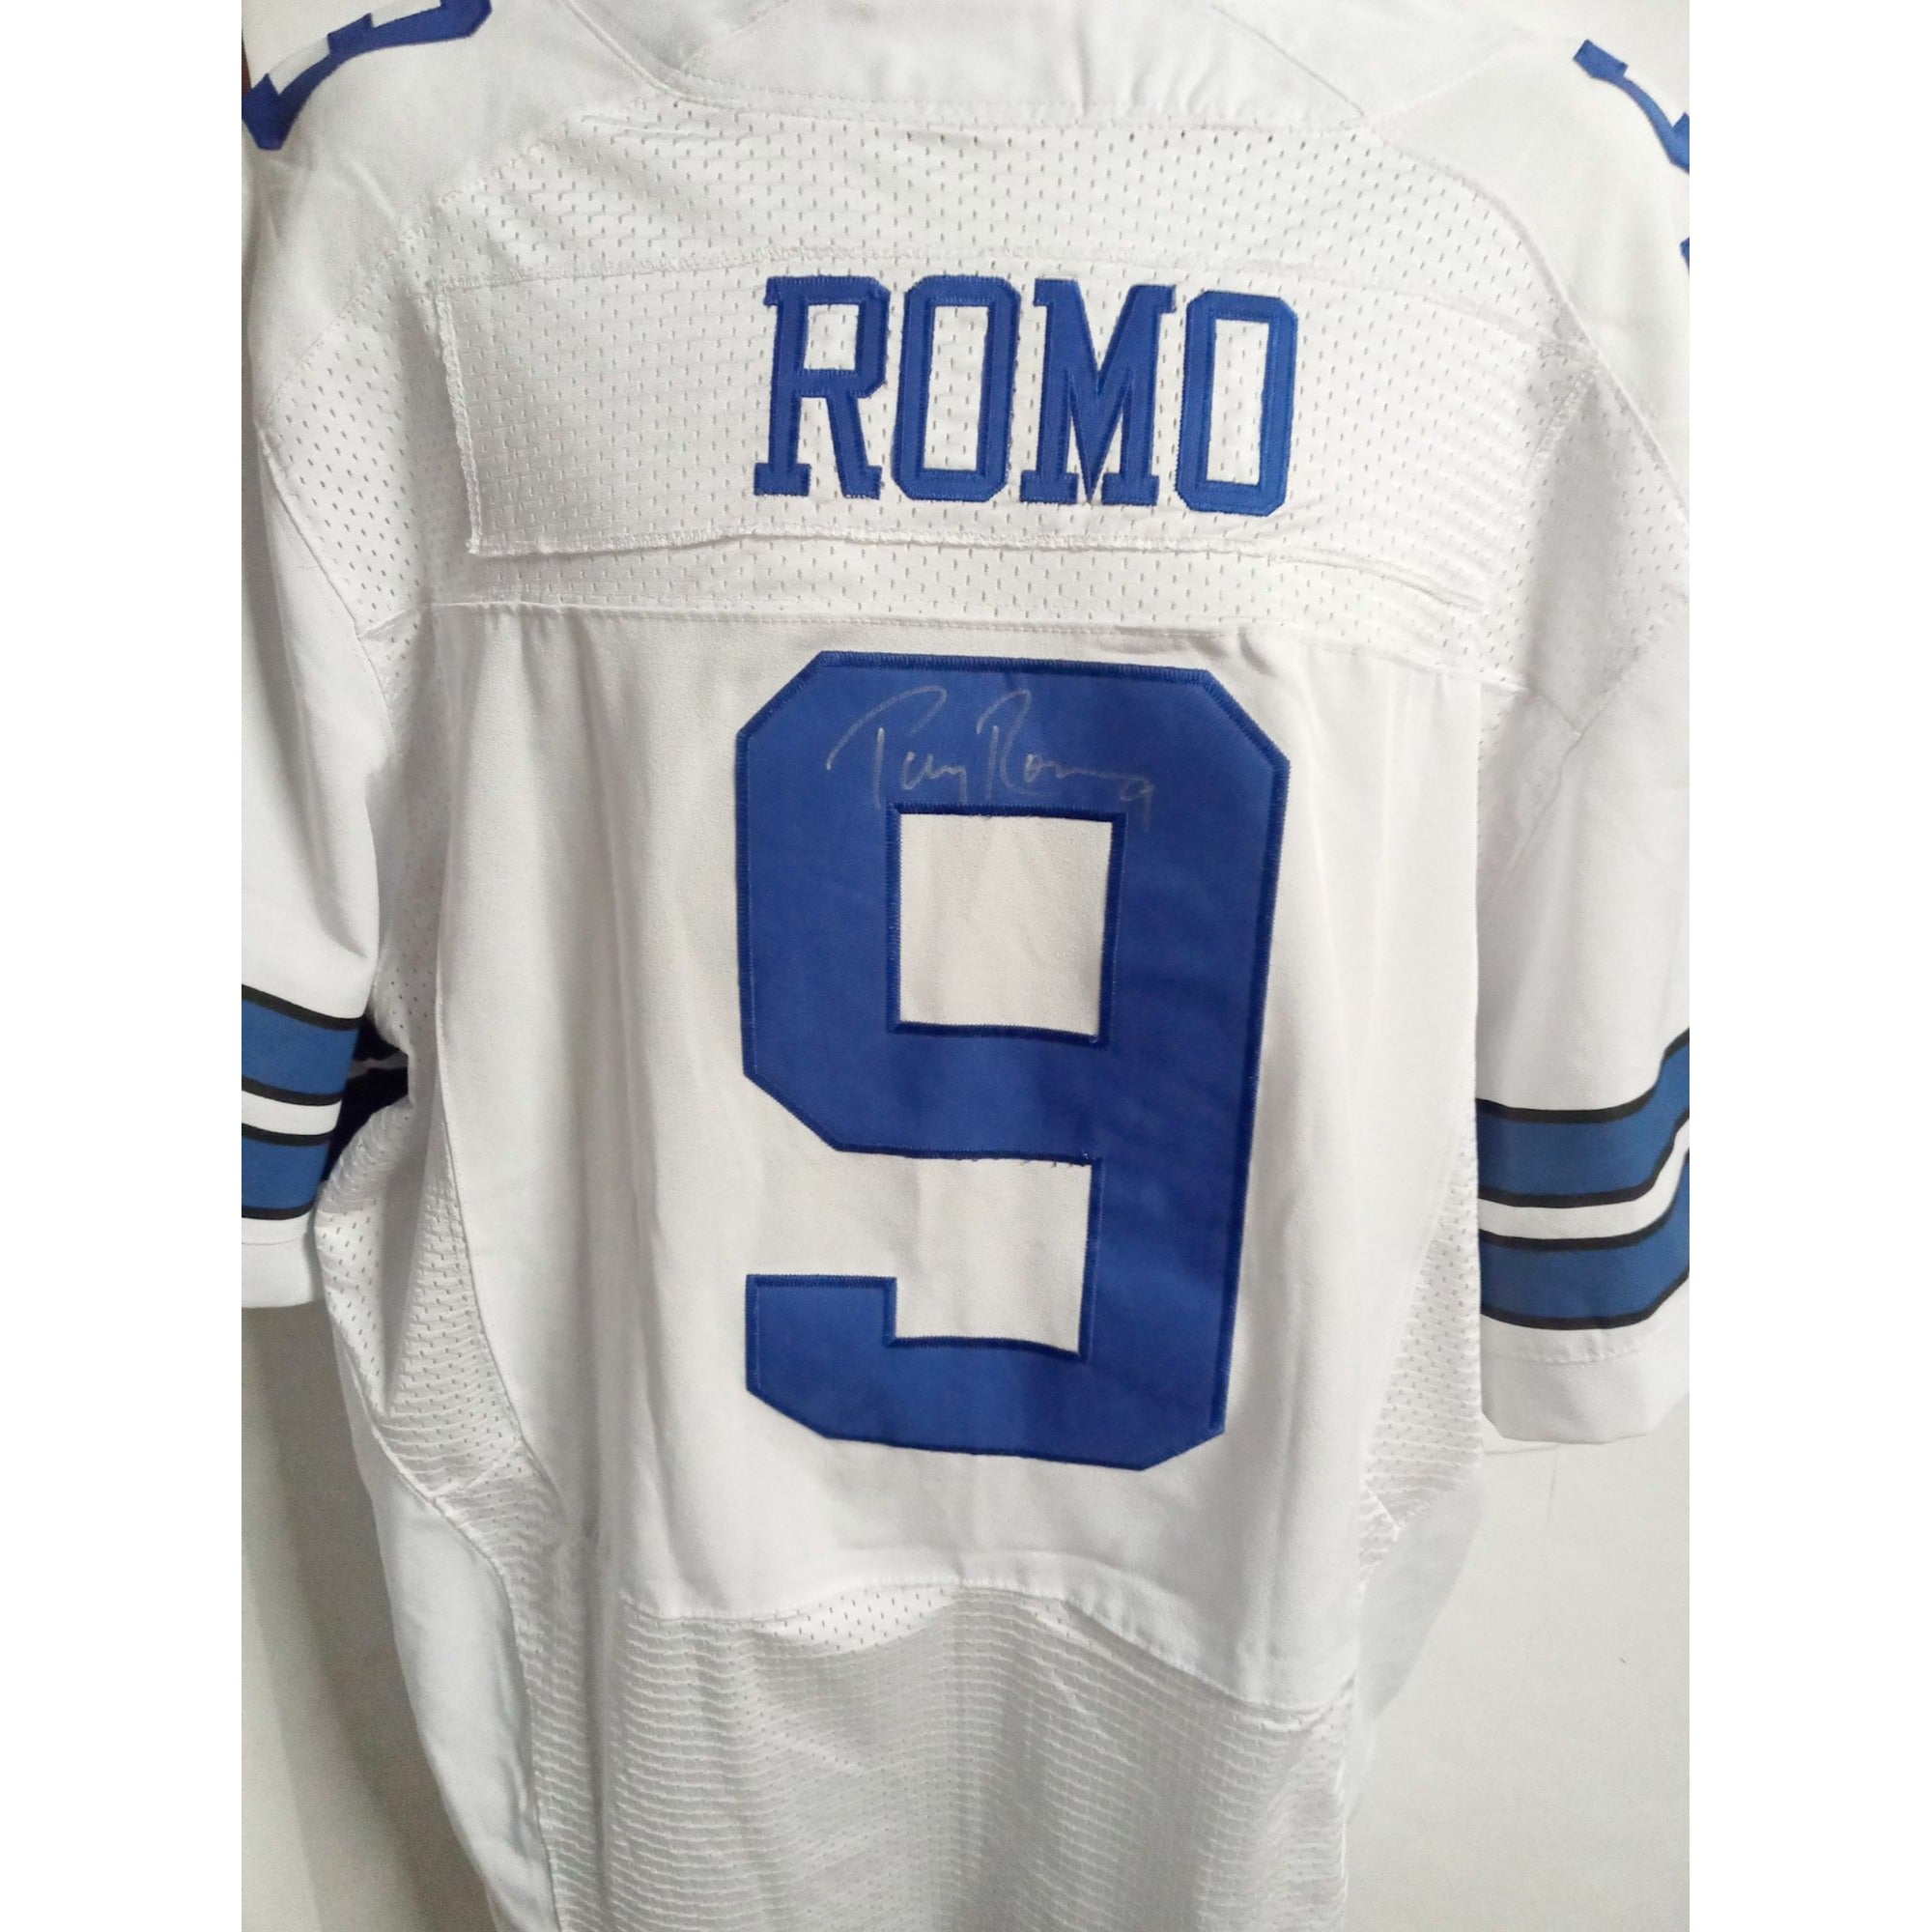 Tony Romo Dallas Cowboys signed jersey with proof